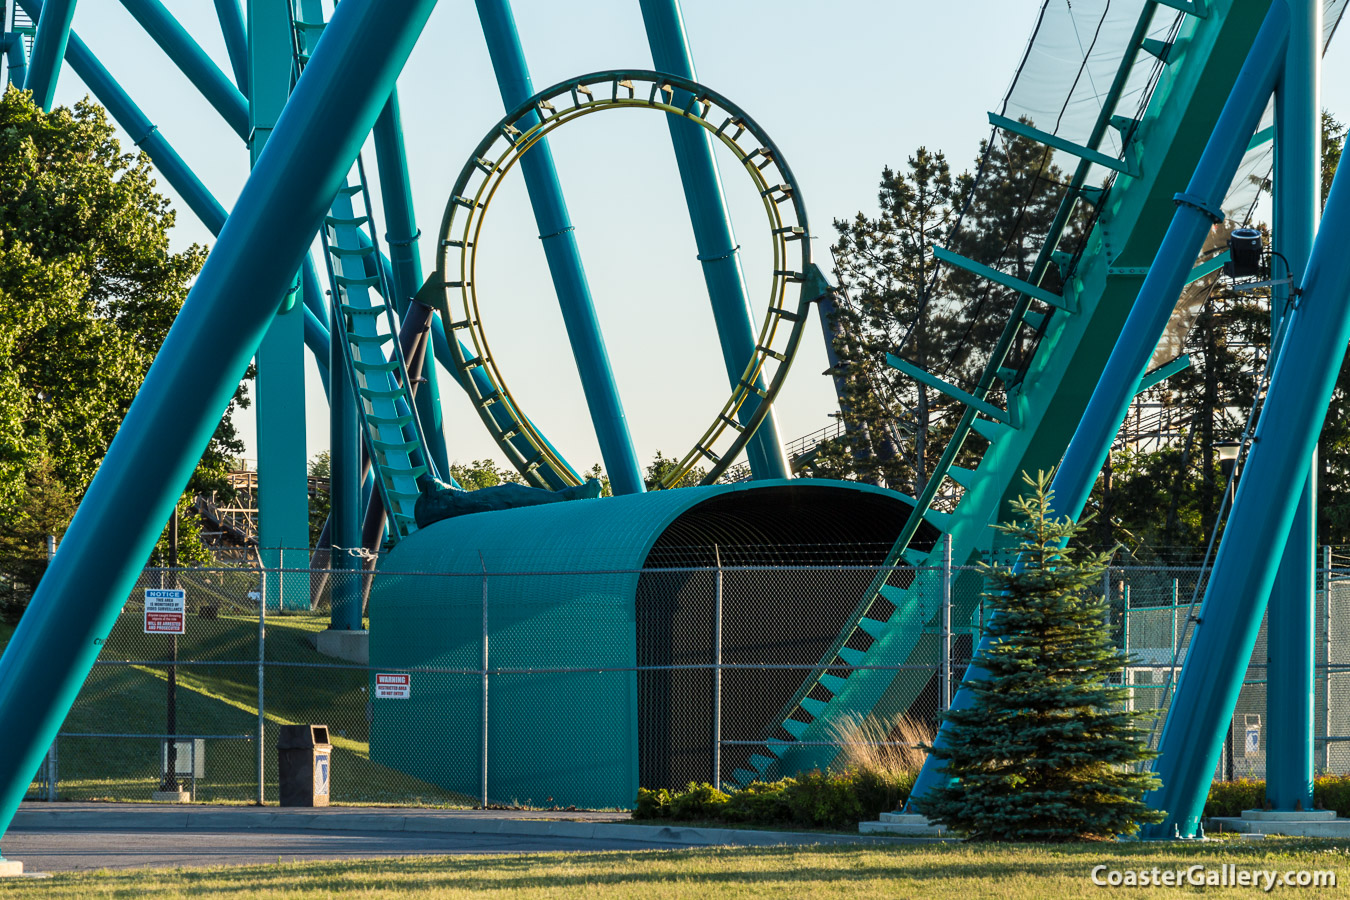 Tunnel on the Leviathan roller coaster at Canada's Wonderland